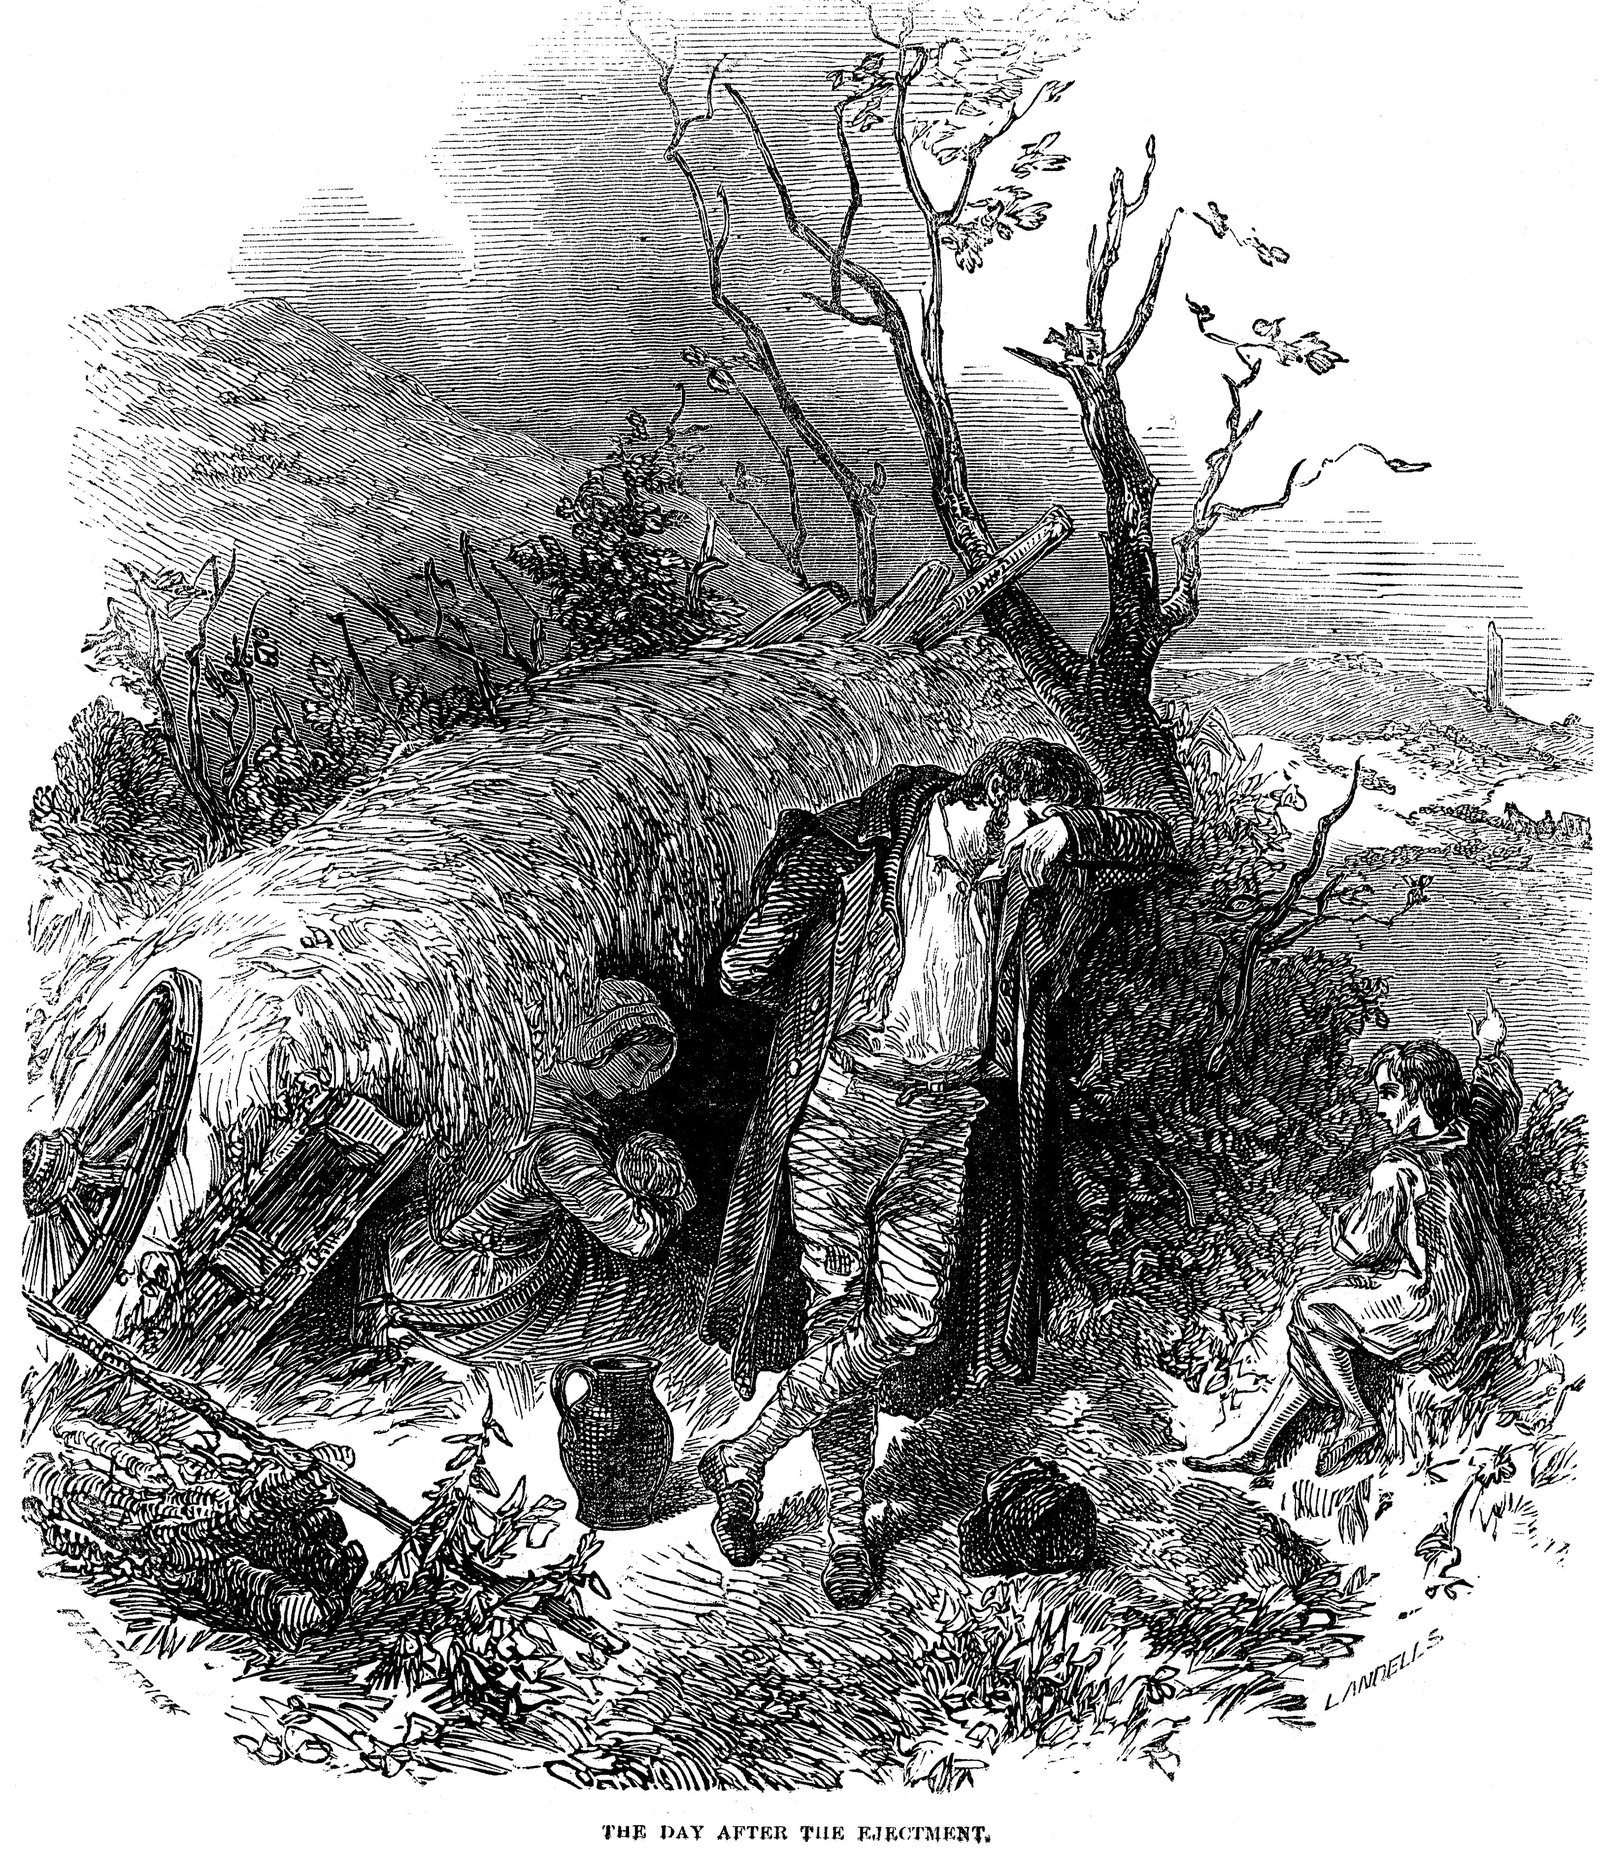 Image - An evicted family finding shelter in a hedgerow the day after eviction from their cottage. From The Illustrated London News, December 1848. Wood engraving. Source: Ann Ronan Pictures/Print C